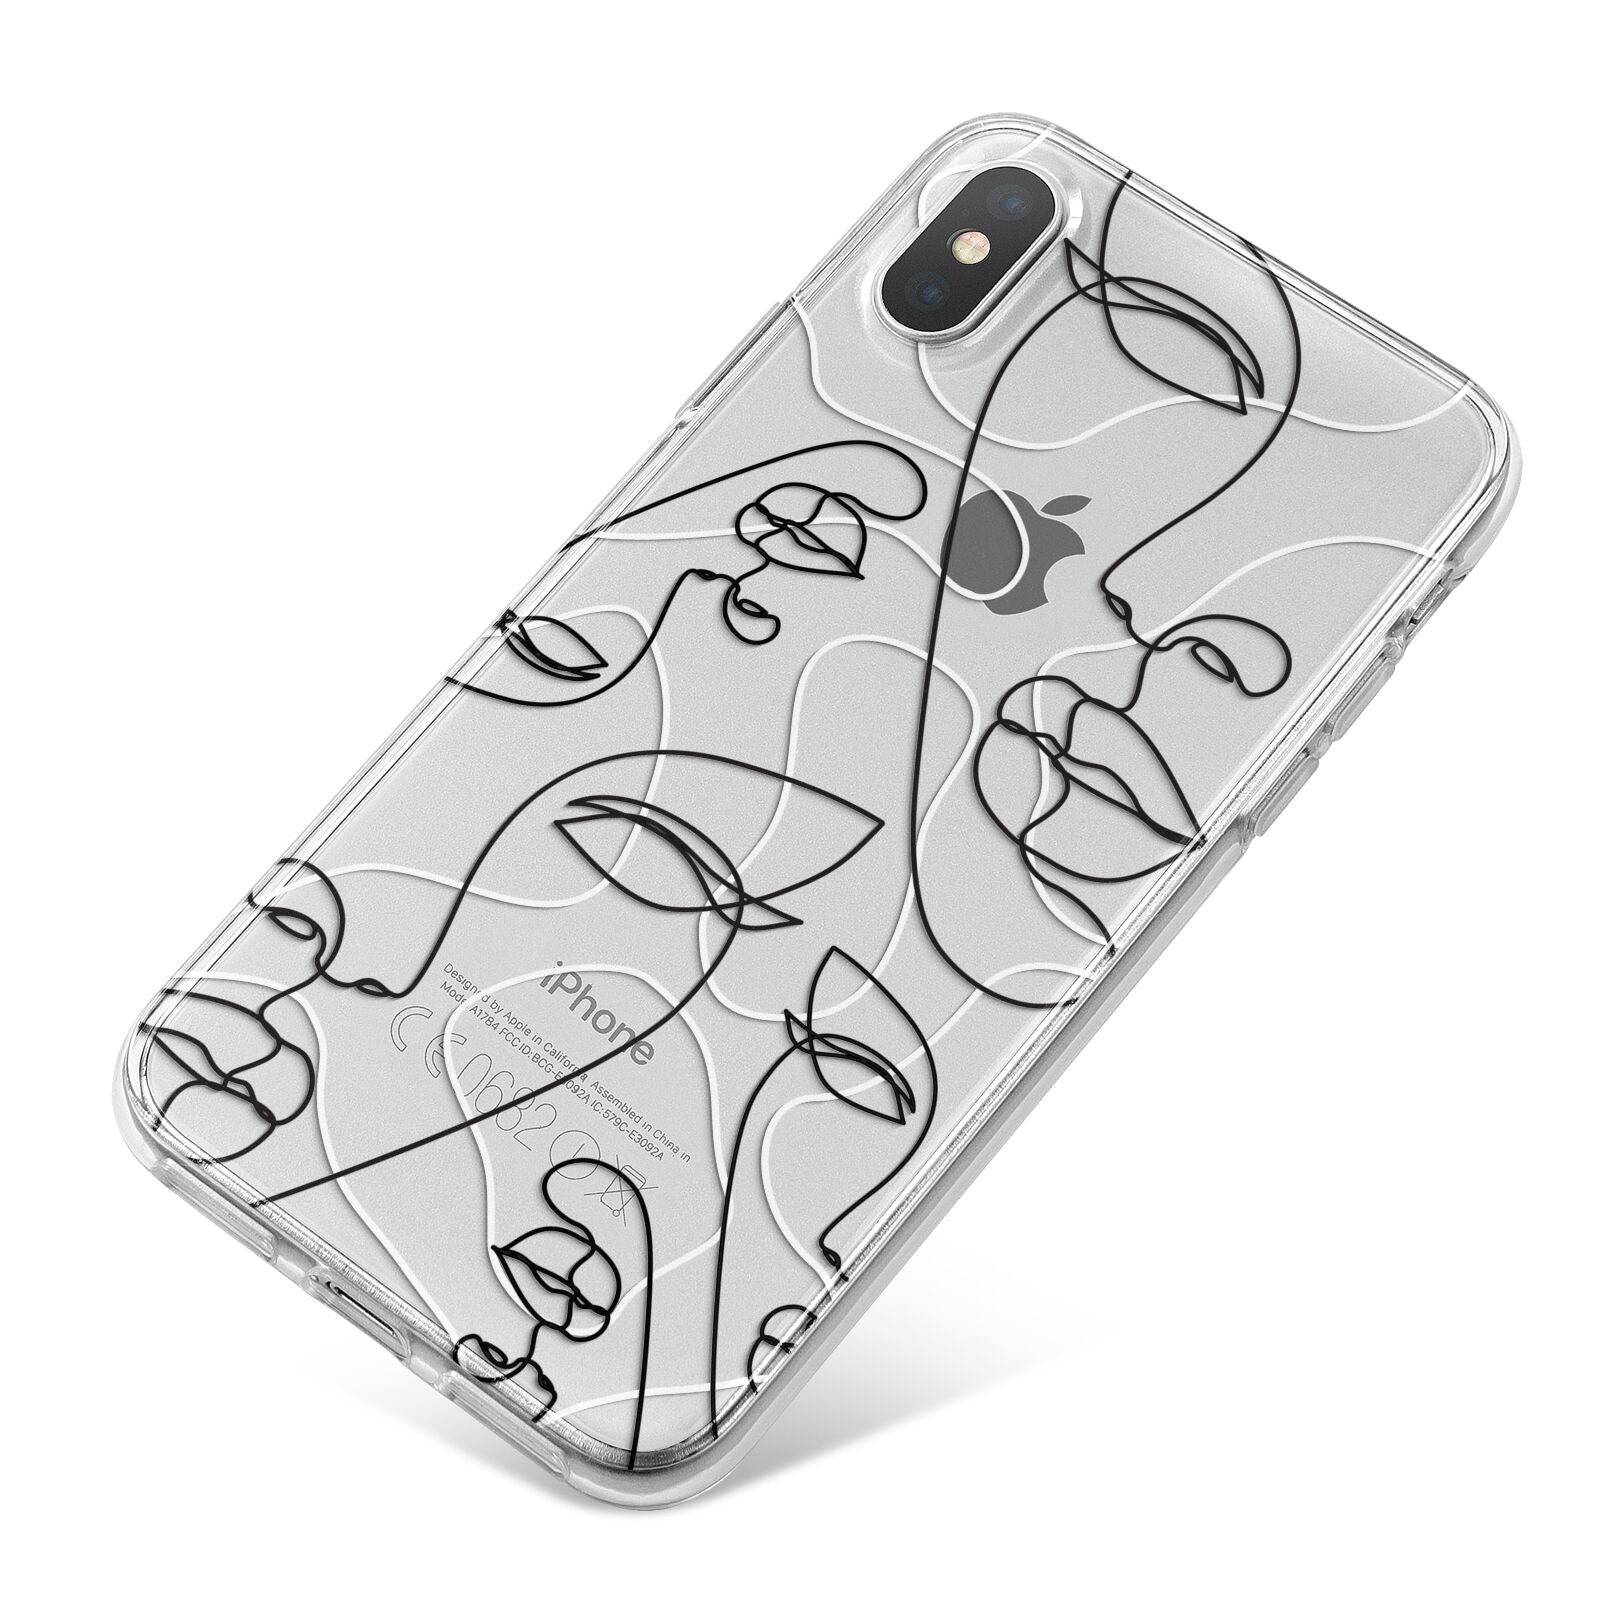 Abstract Face iPhone X Bumper Case on Silver iPhone